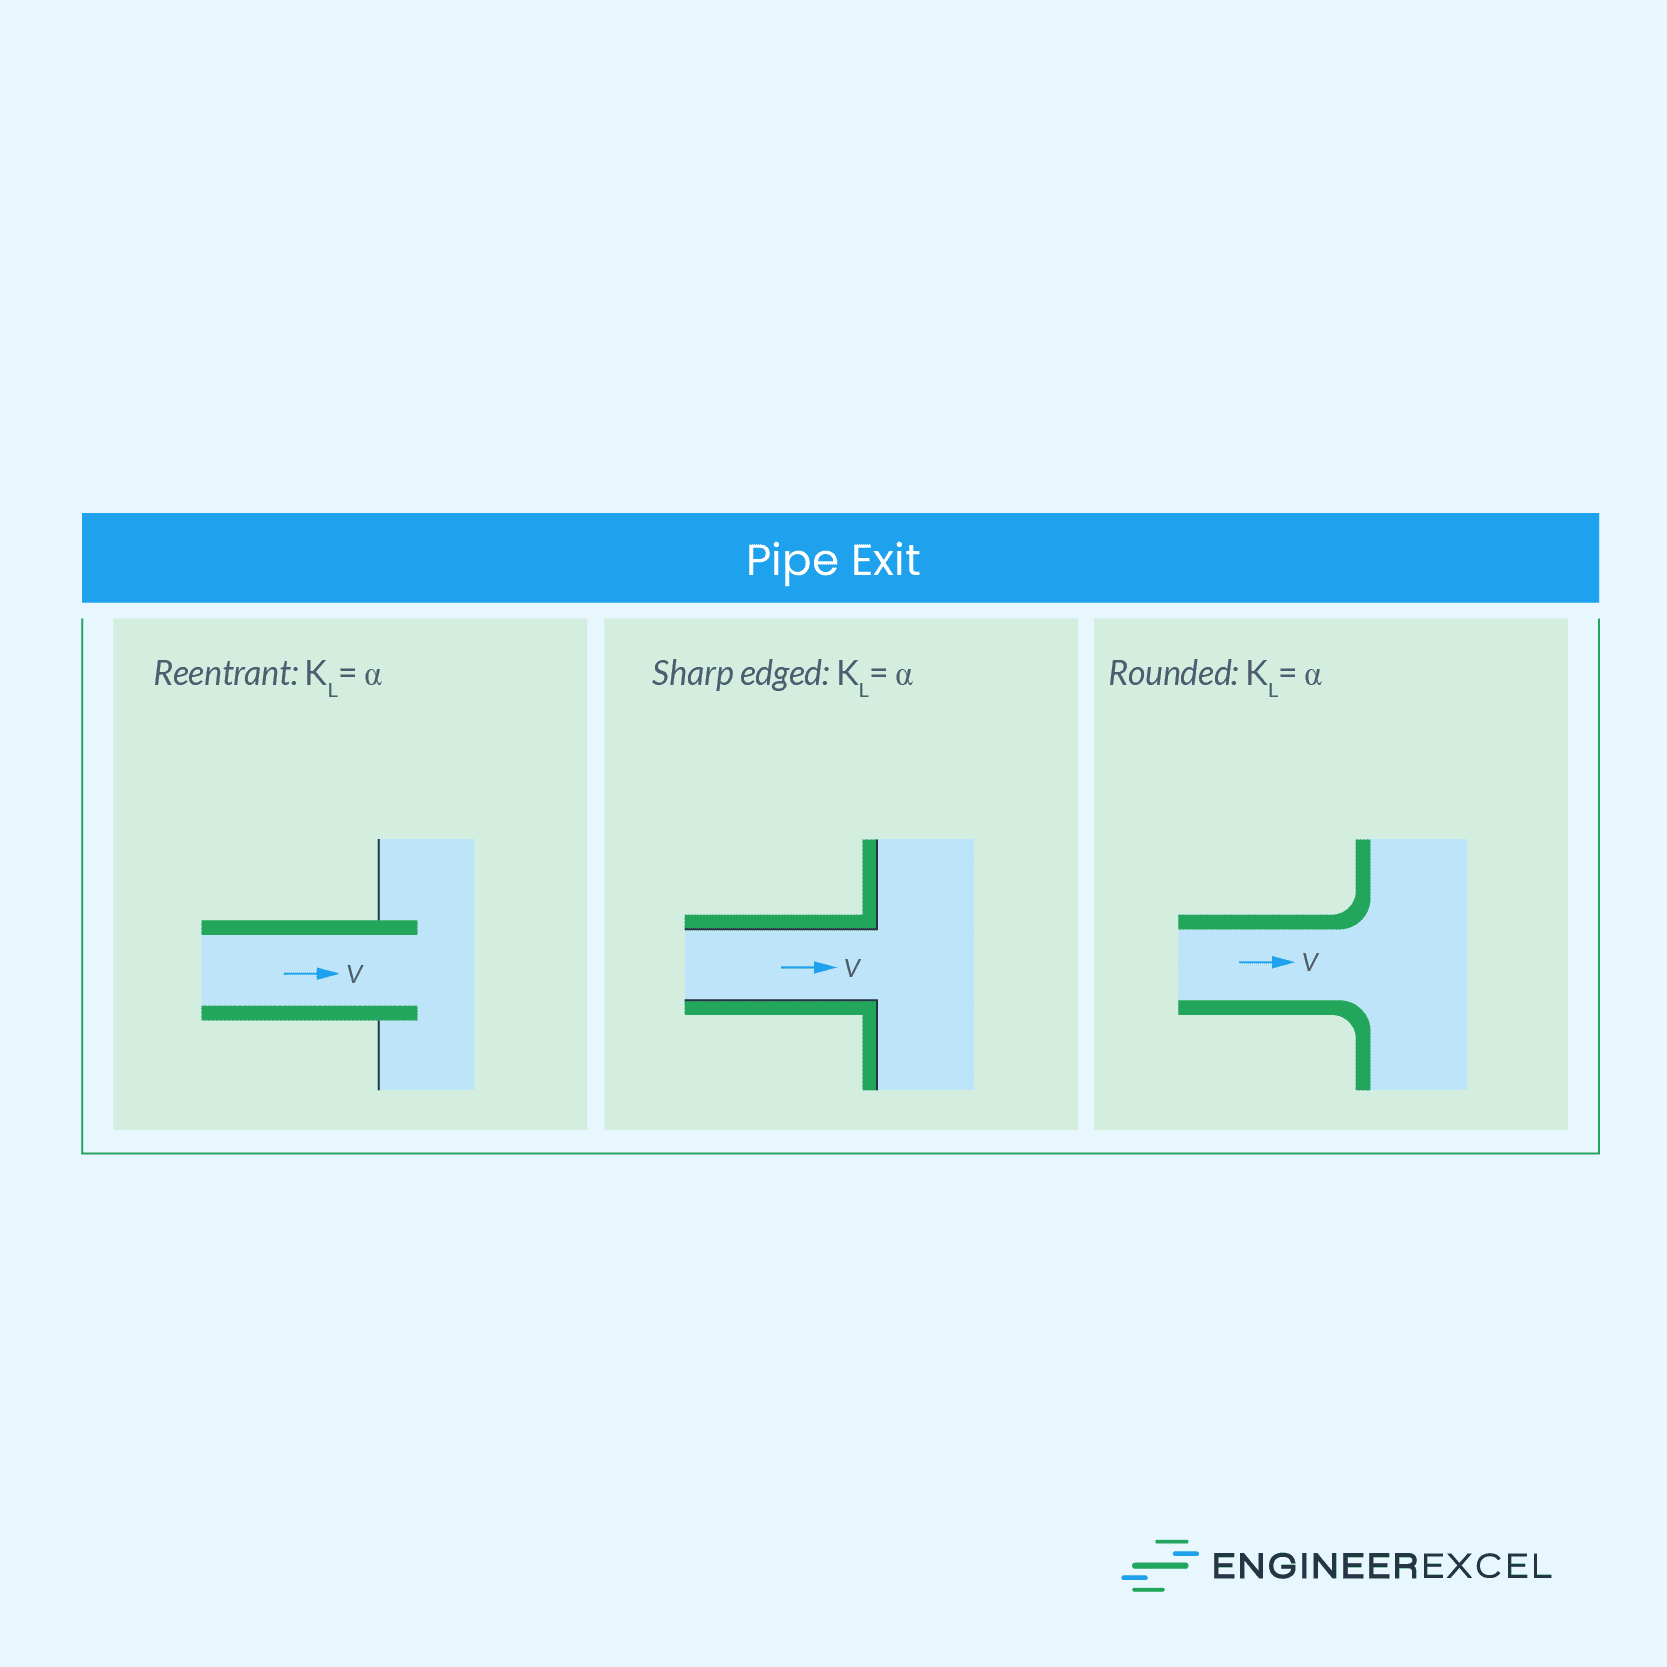 Loss coefficients for different pipe exit geometries